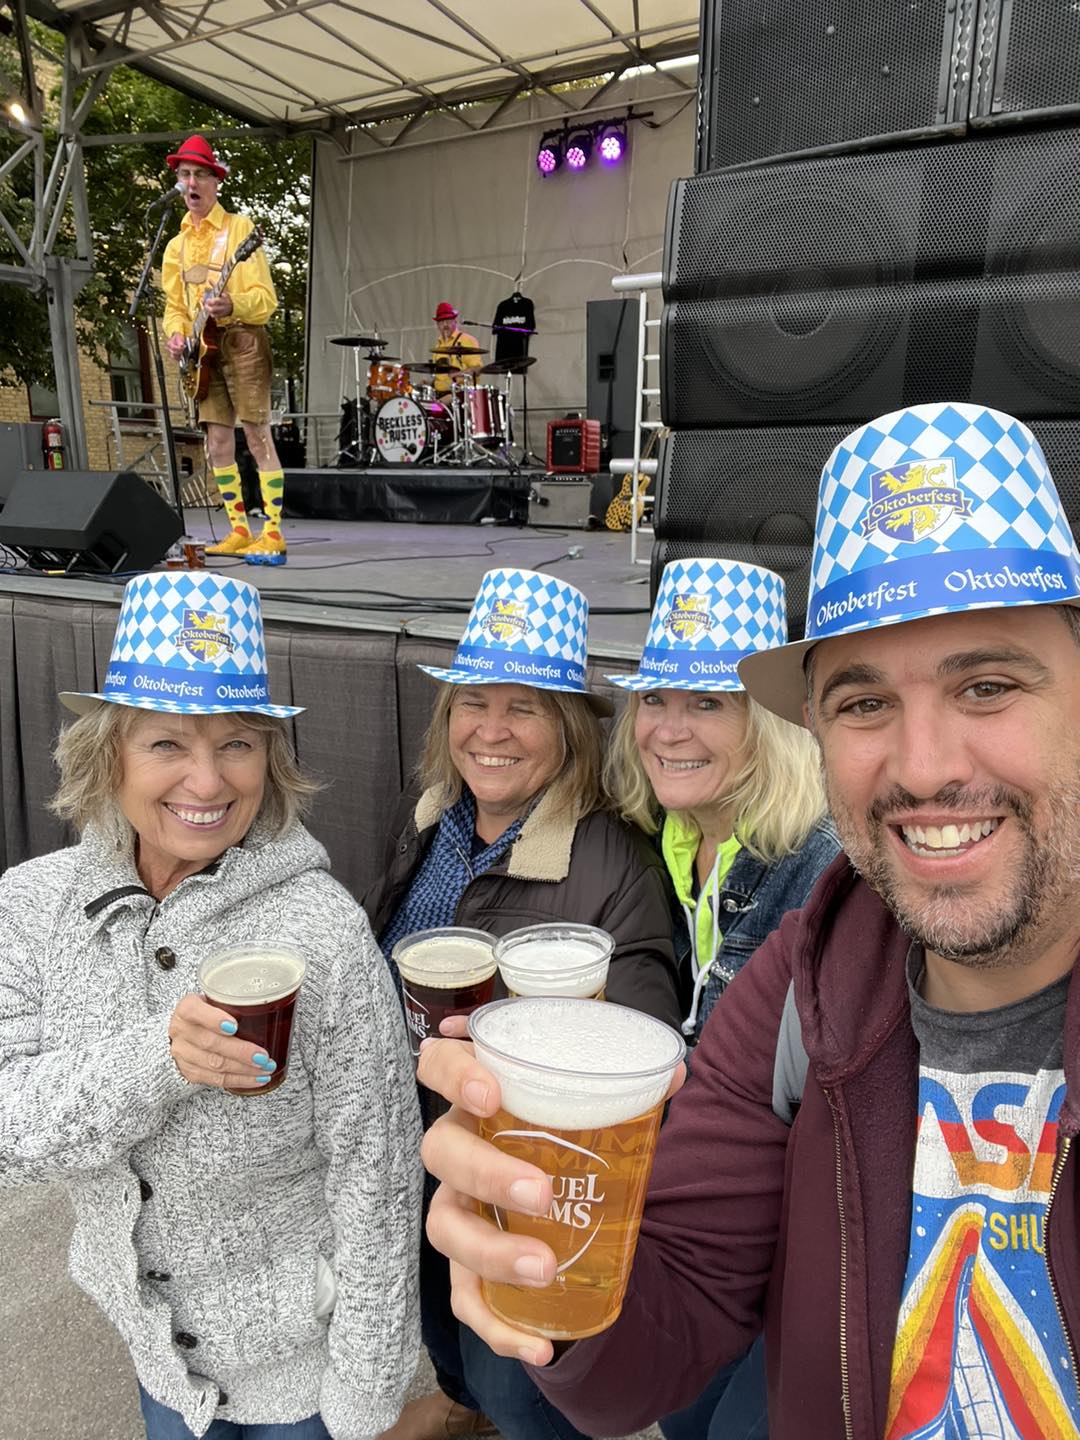 <h1 class="tribe-events-single-event-title">Join Joe at East Dundee Oktoberfest</h1>